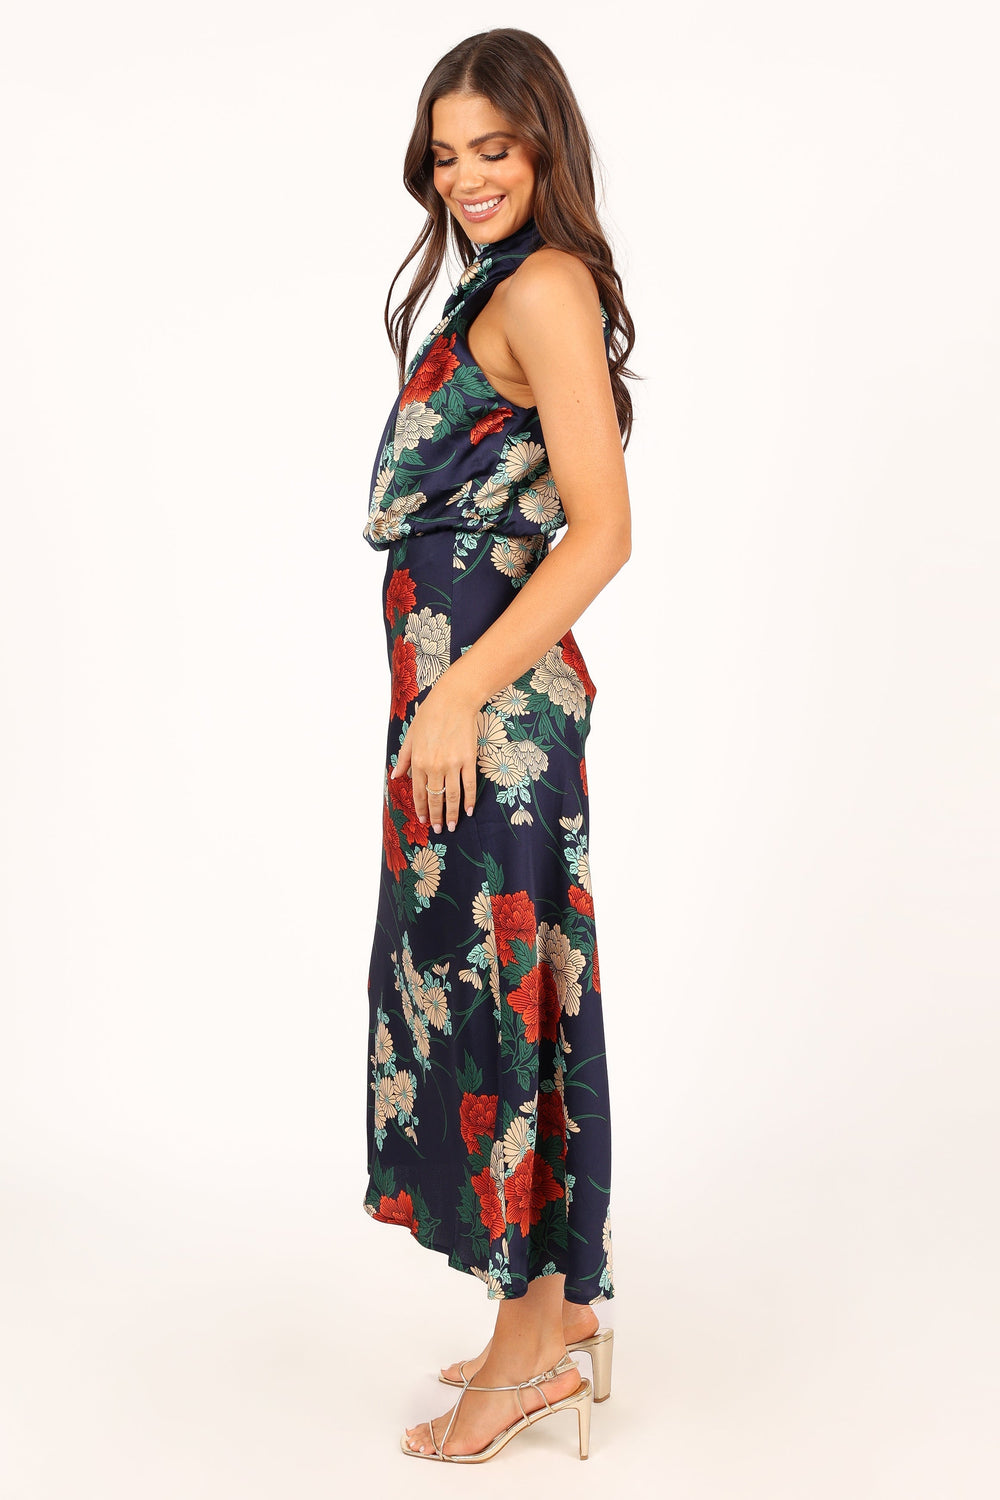 Petal and Pup USA DRESSES Anabelle Halter Neck Maxi Dress - Navy Floral